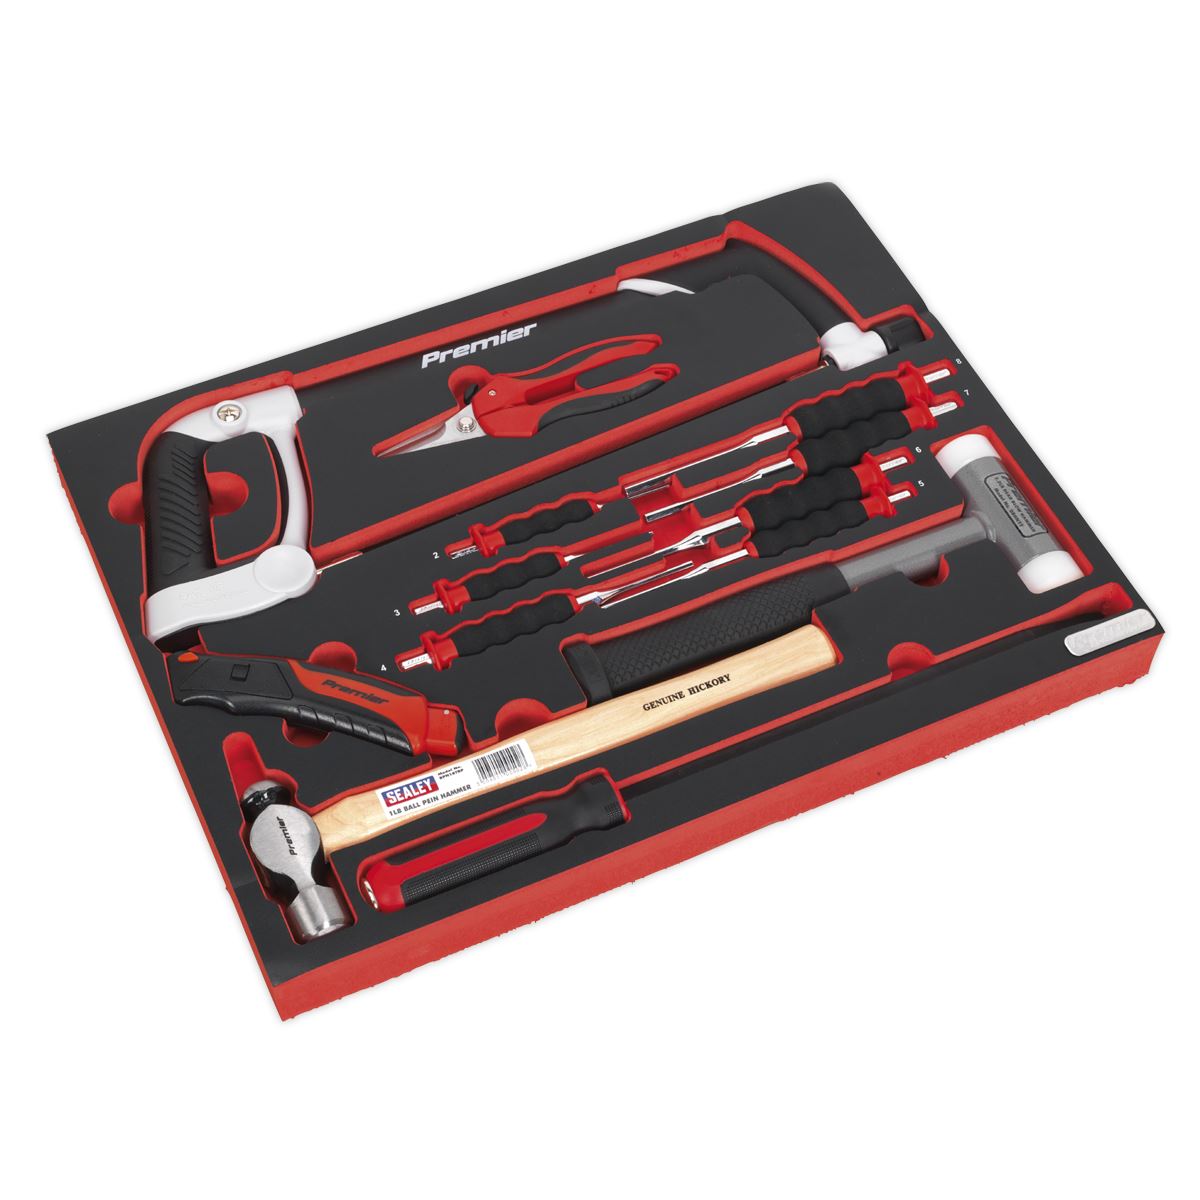 Sealey Premier Platinum Tool Tray with Hacksaw, Hammers & Punches 13pc